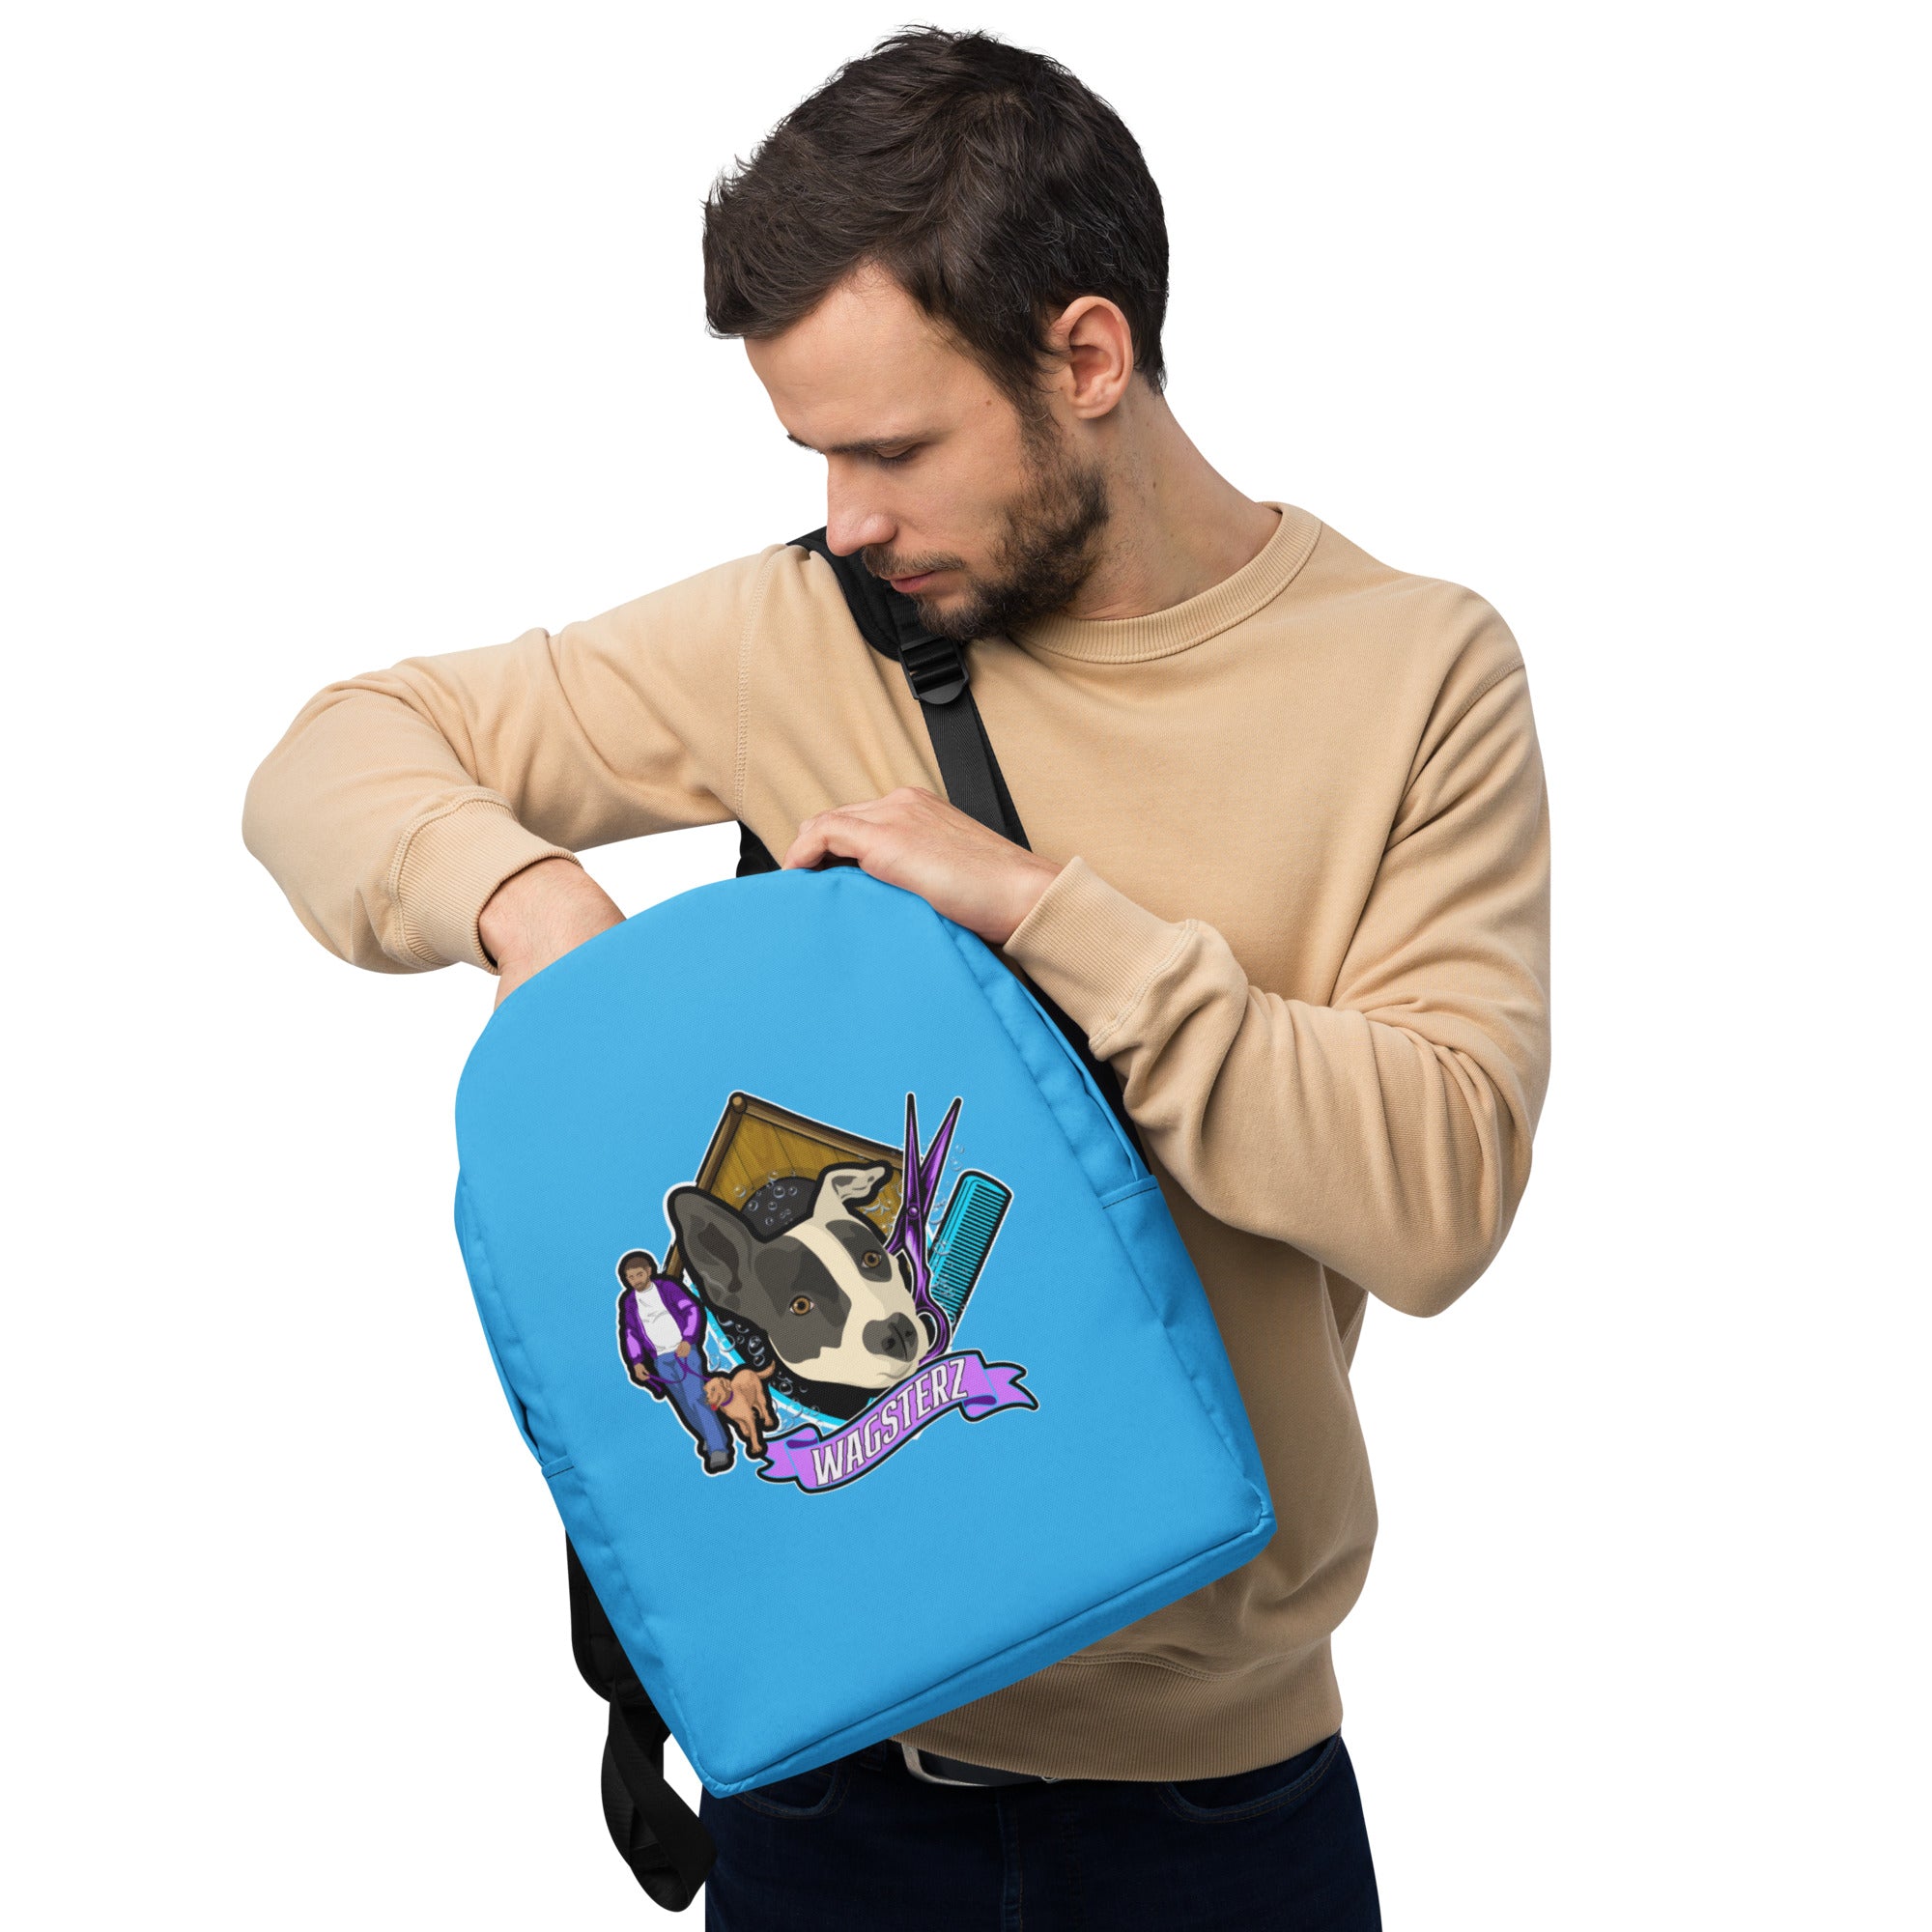 Wagsterz Backpack